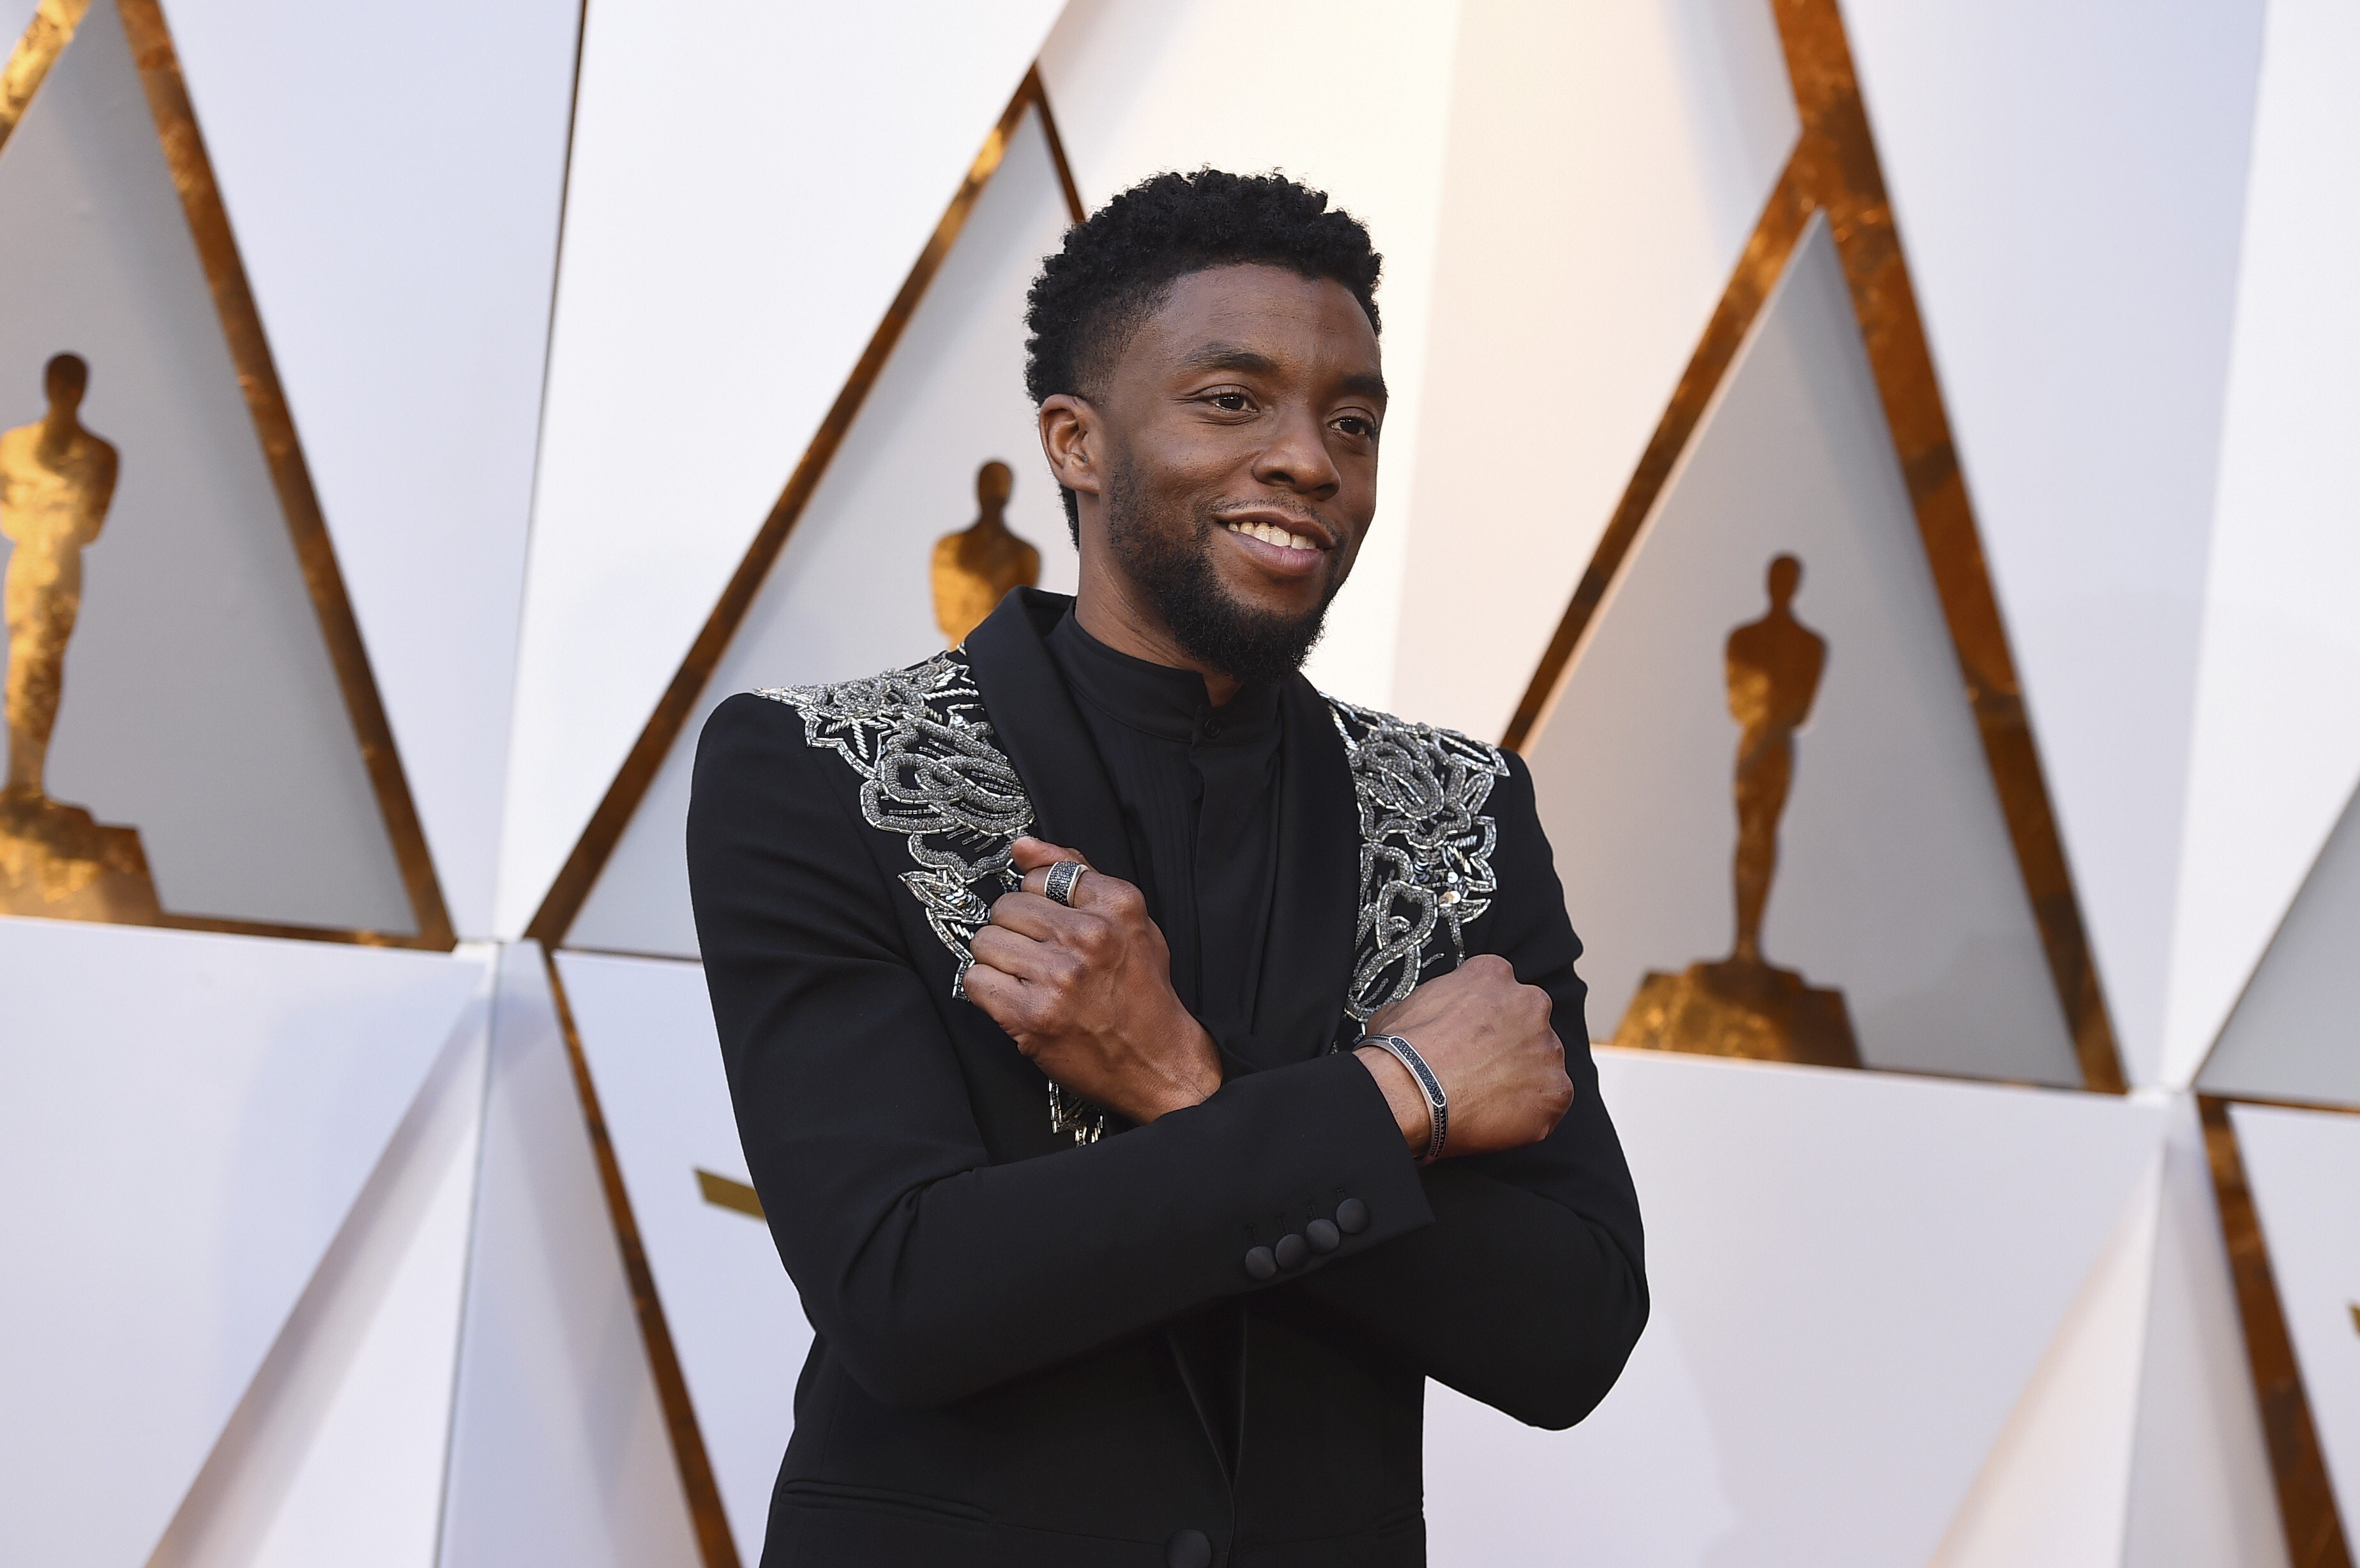 Chadwick Boseman at the Oscars in 2018. The actor was diagnosed with cancer before the filming of Black Panther but continued to make films while going through chemotherapy and surgery. Photo: AP